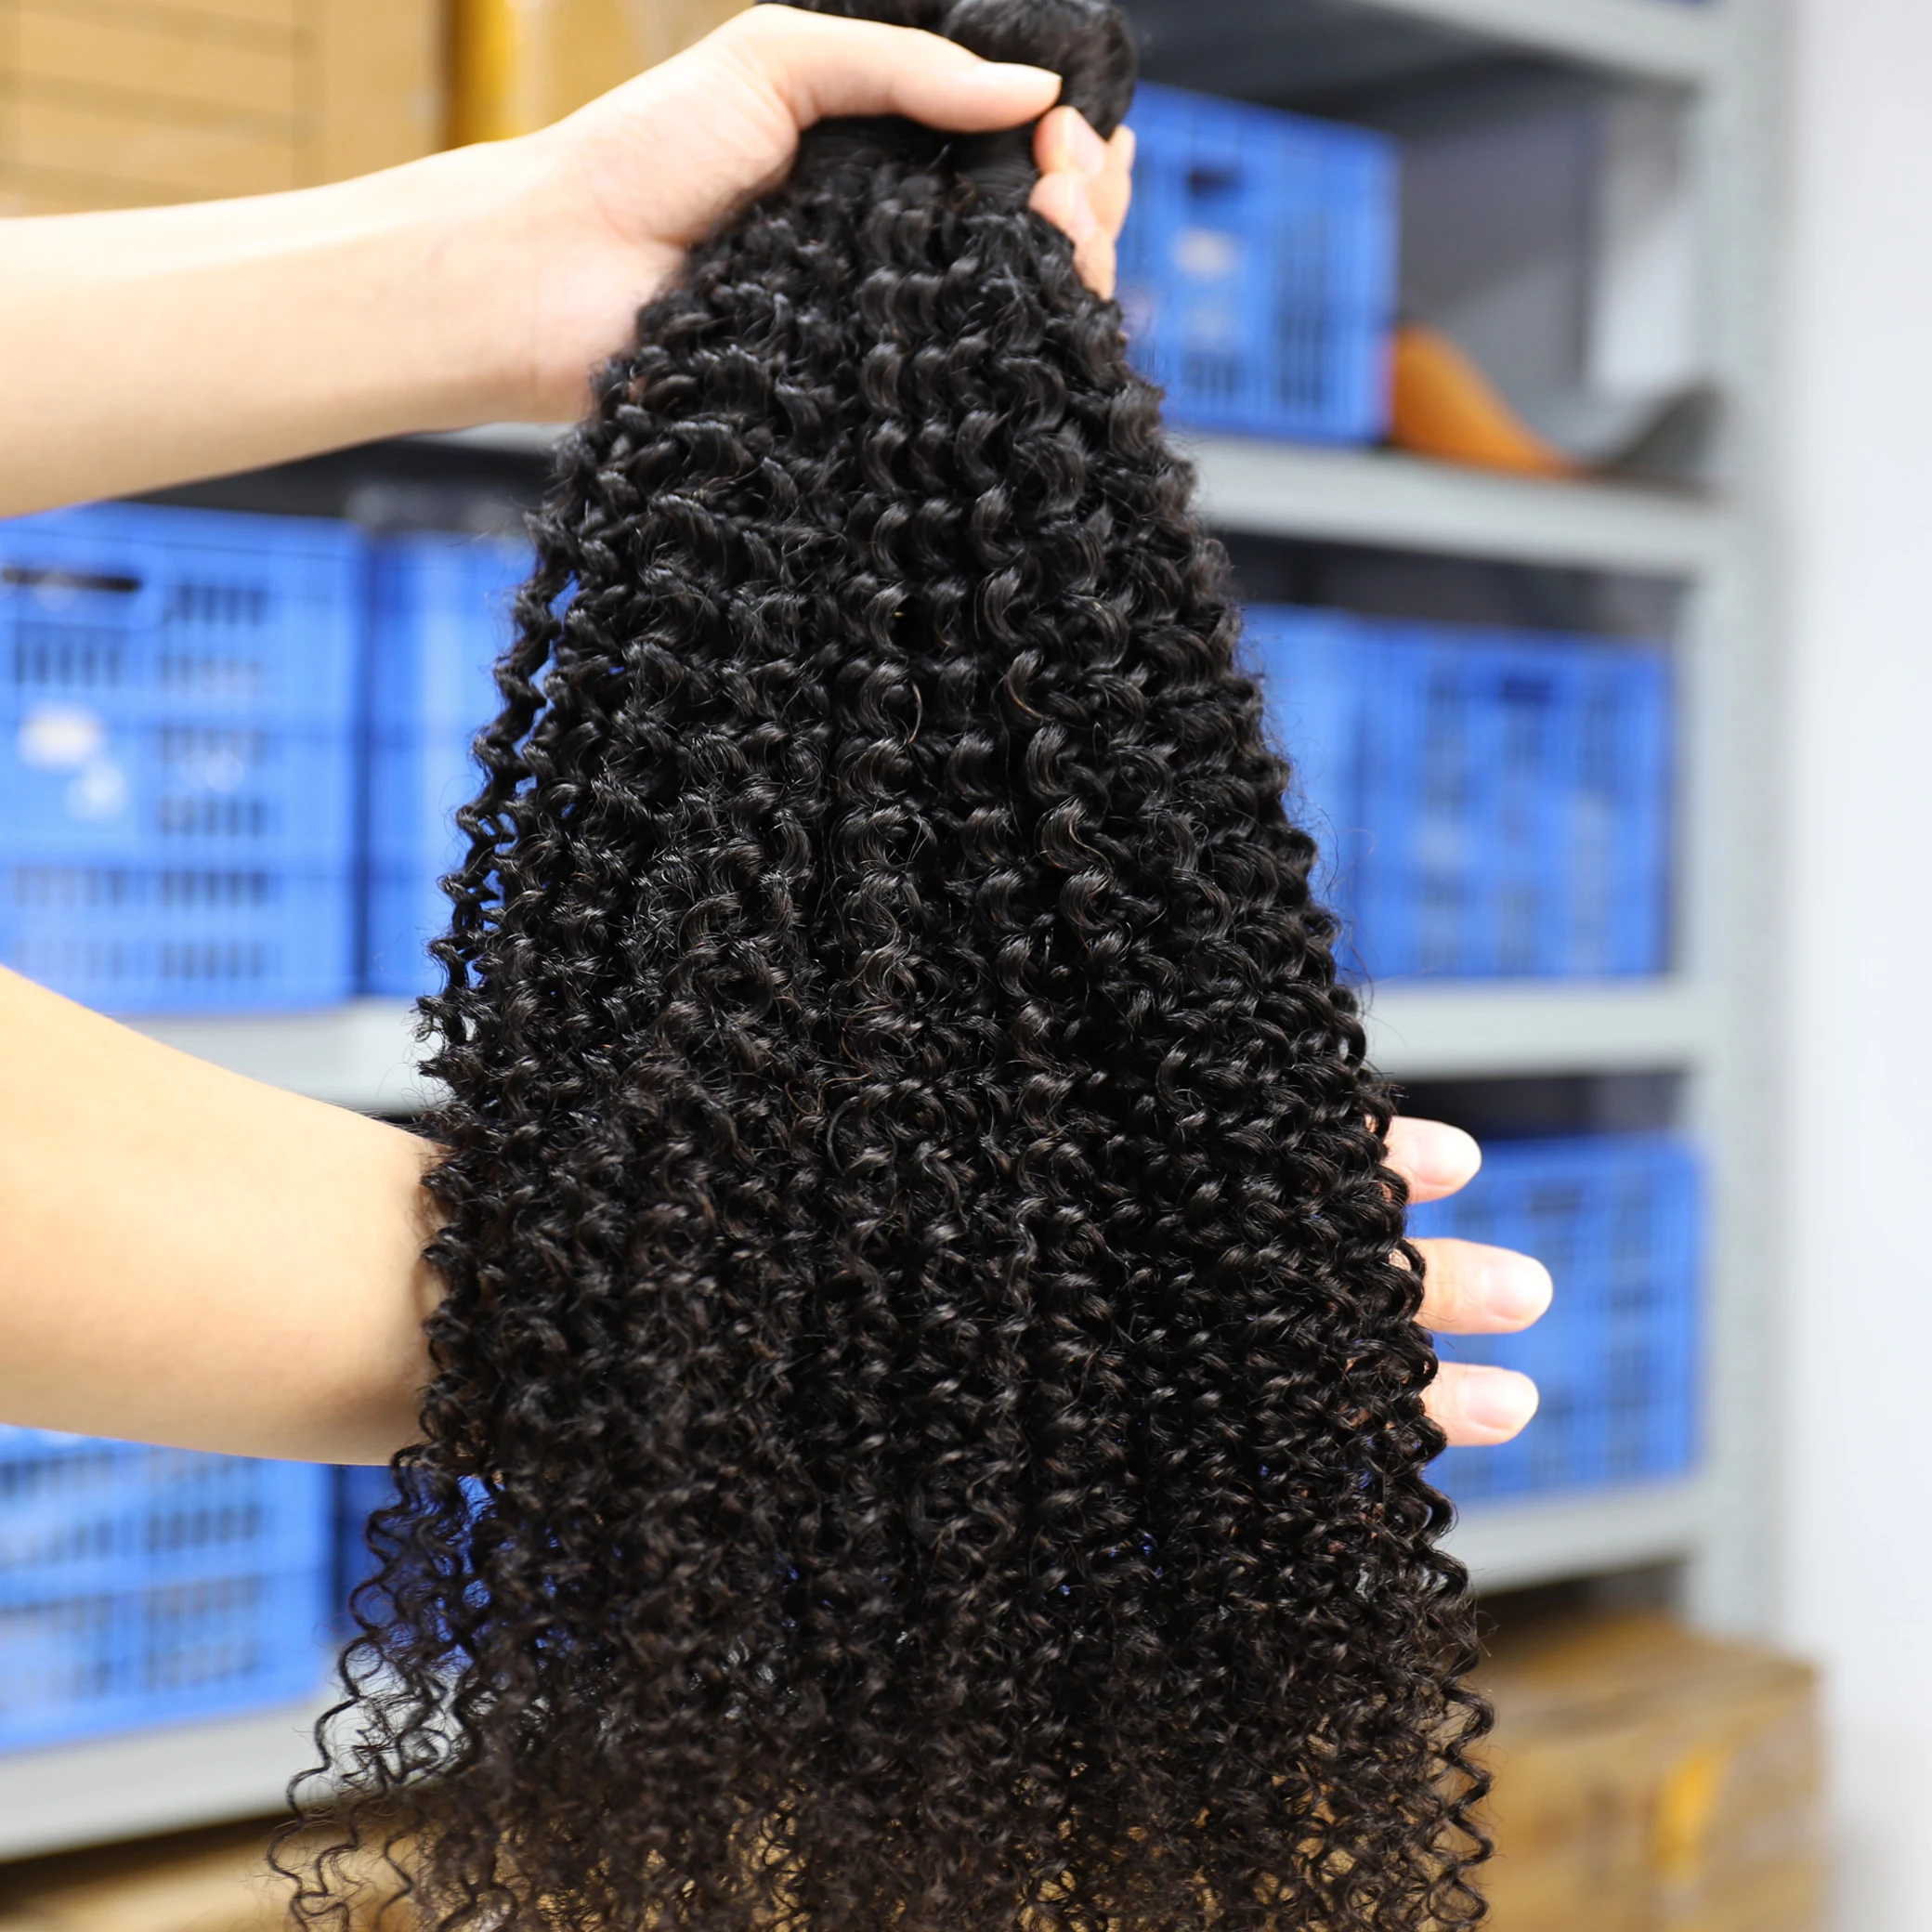 

Wholesale Cuticle Aligned Grade 10A Raw Indian Hair, Virgin Raw Curl Human Hair Bundles Extensions Directly From India Vendor